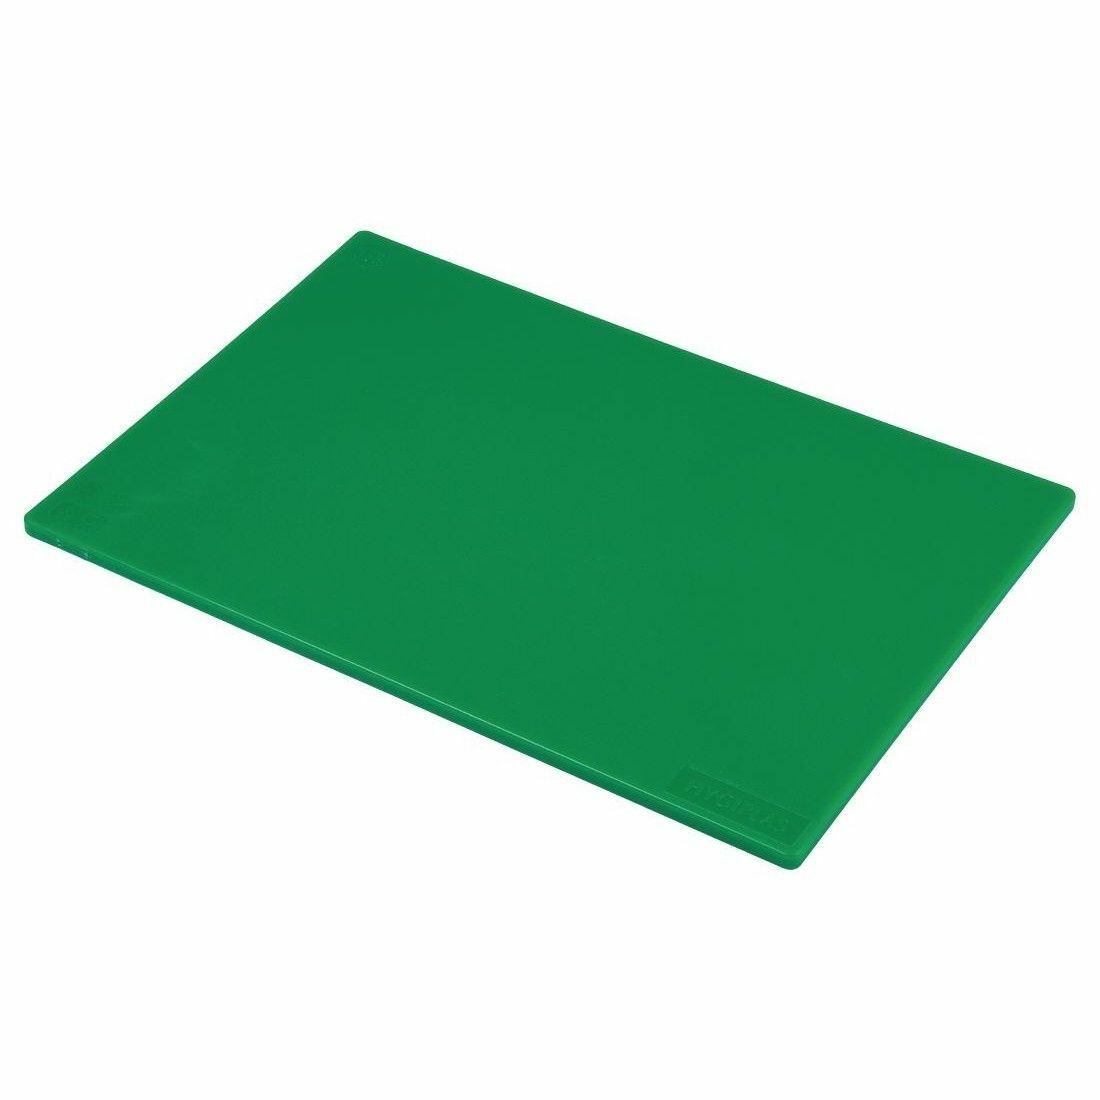 Green Commercial Kitchen Chopping Board Colour Coded Hygiene Catering Food Cutting Set